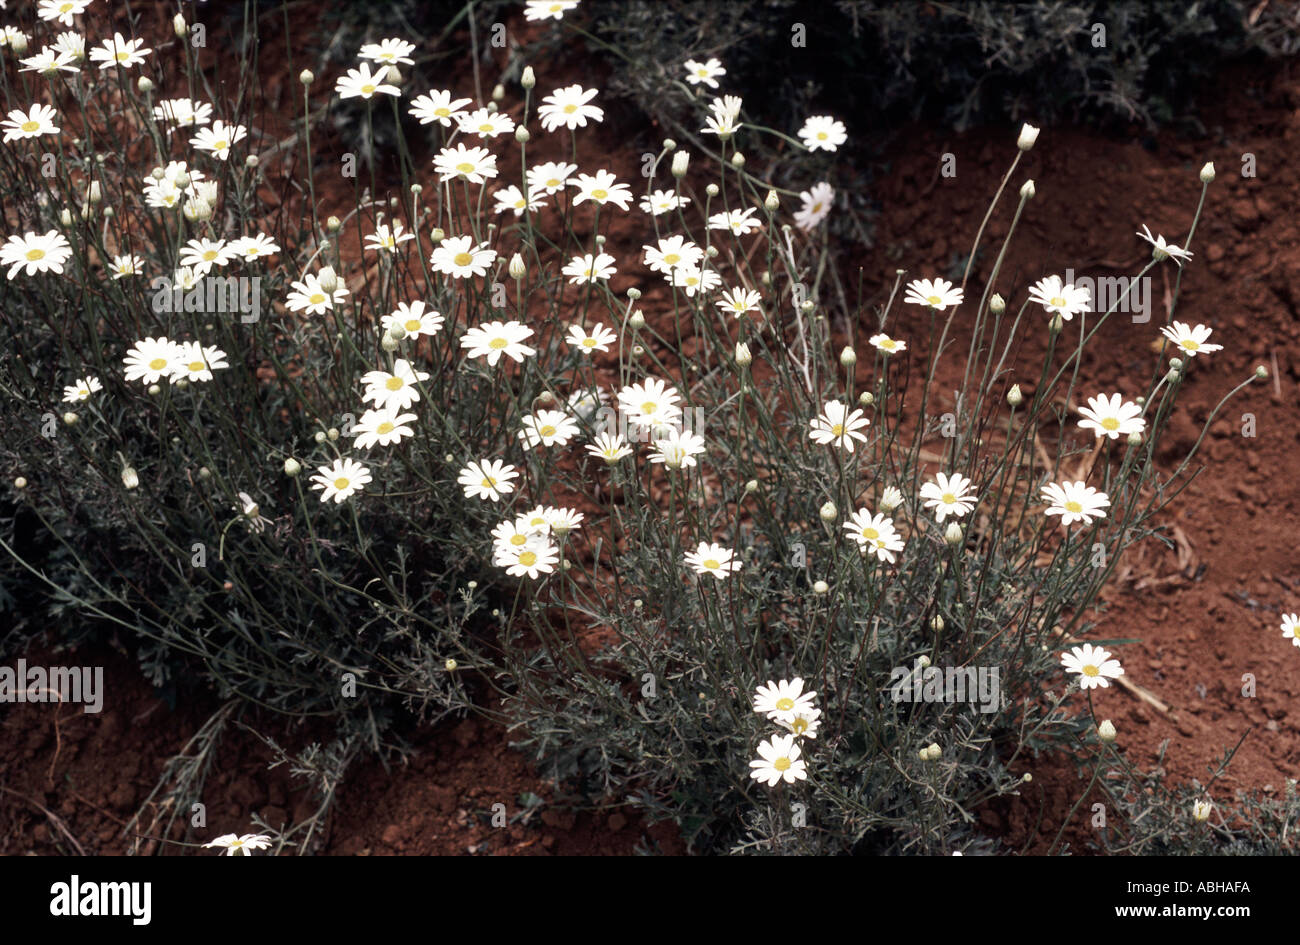 Flowering crop of pyrethrum used as a natural insecticide in Kenya Stock Photo